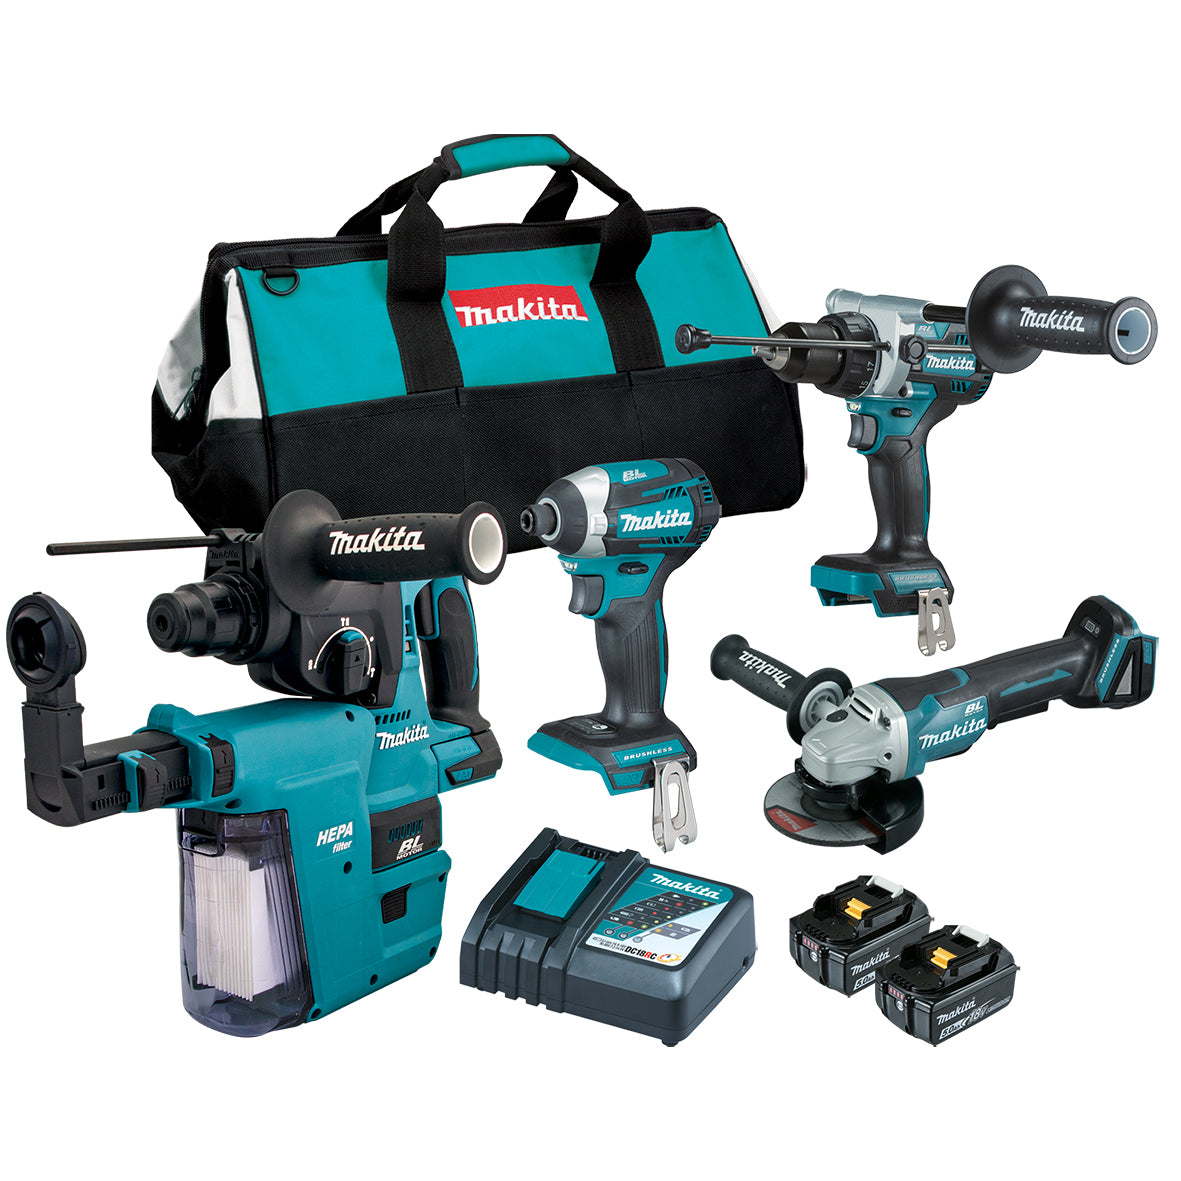 18V Brushless 4-Piece Combo Kit DLX4152TX1 by Makita